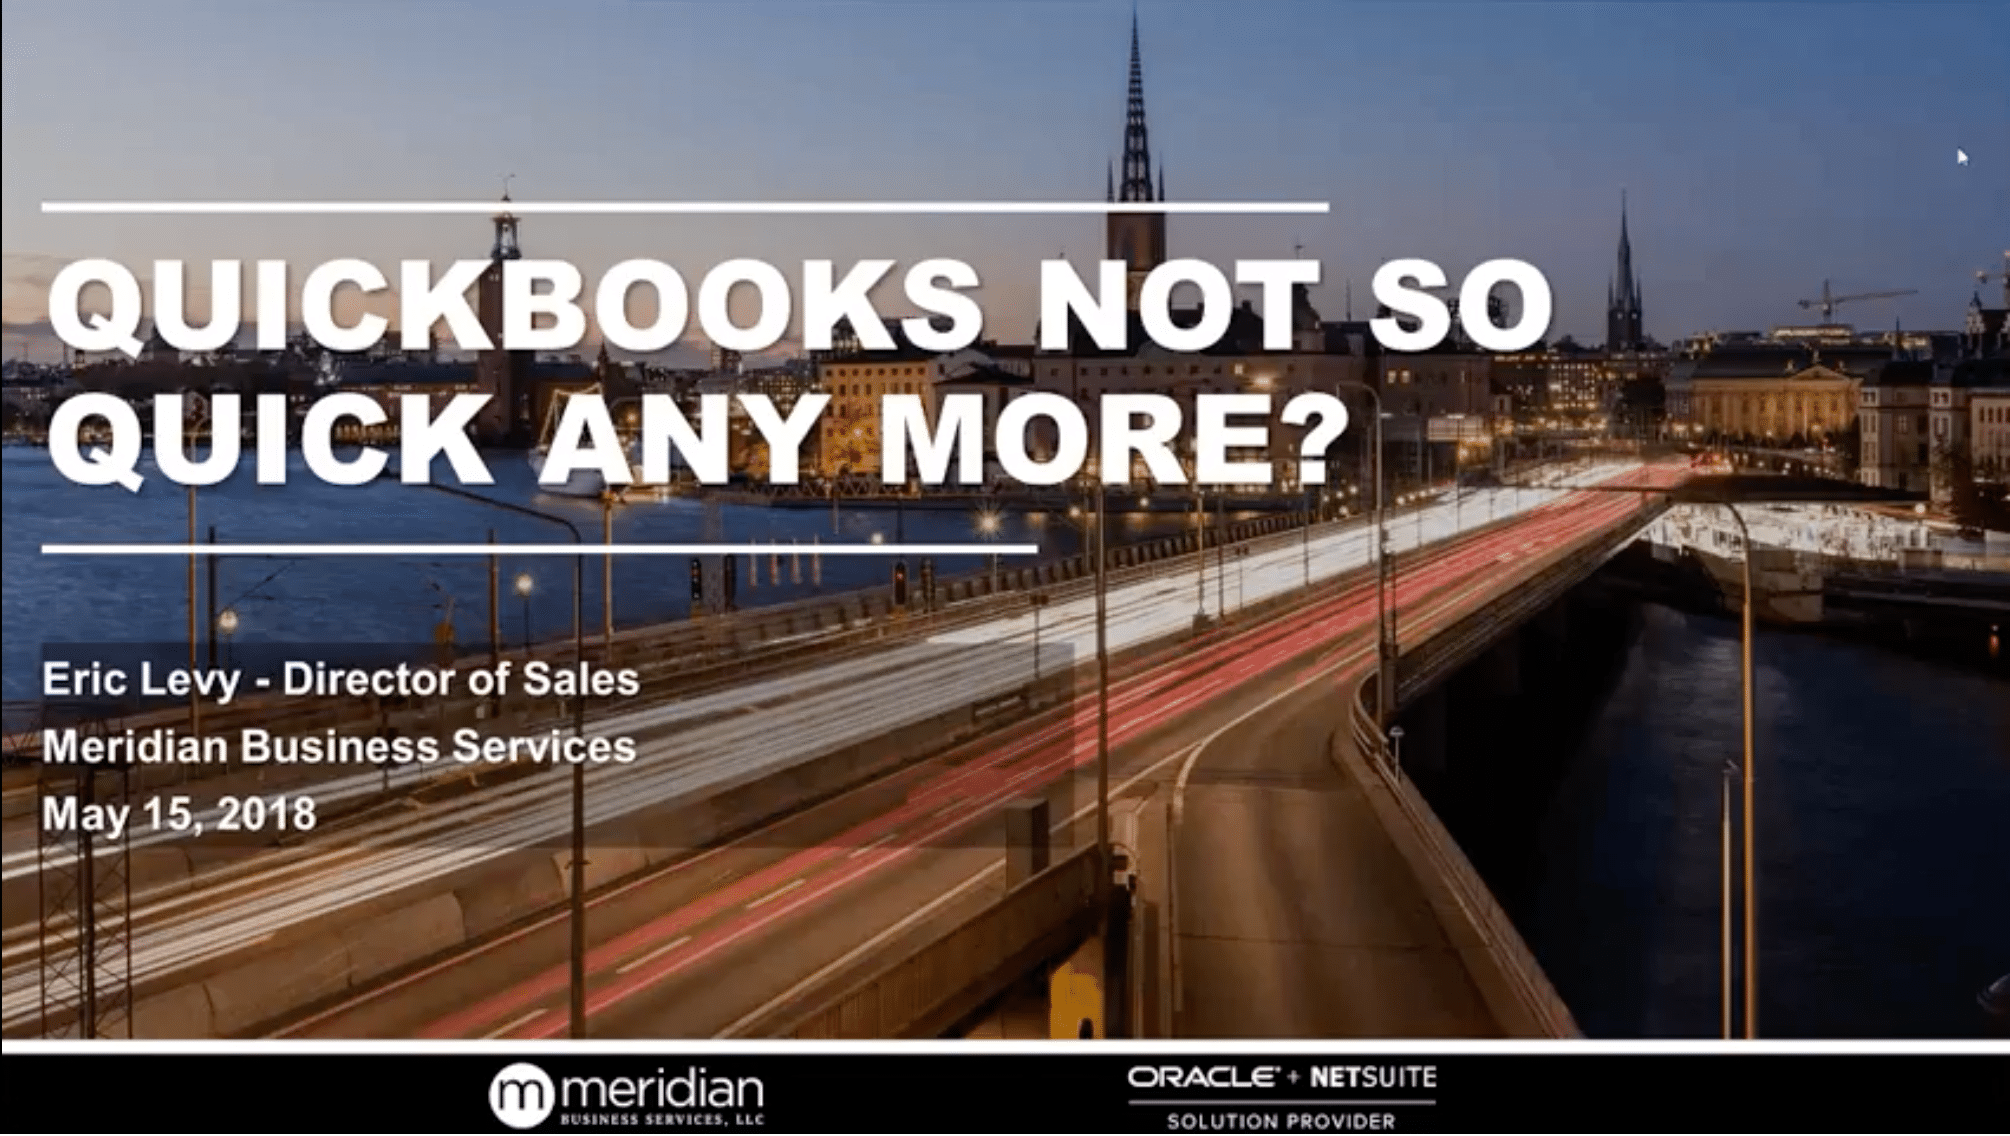 Not So Quick Anymore? Strategies if You’ve Outgrown QuickBooks